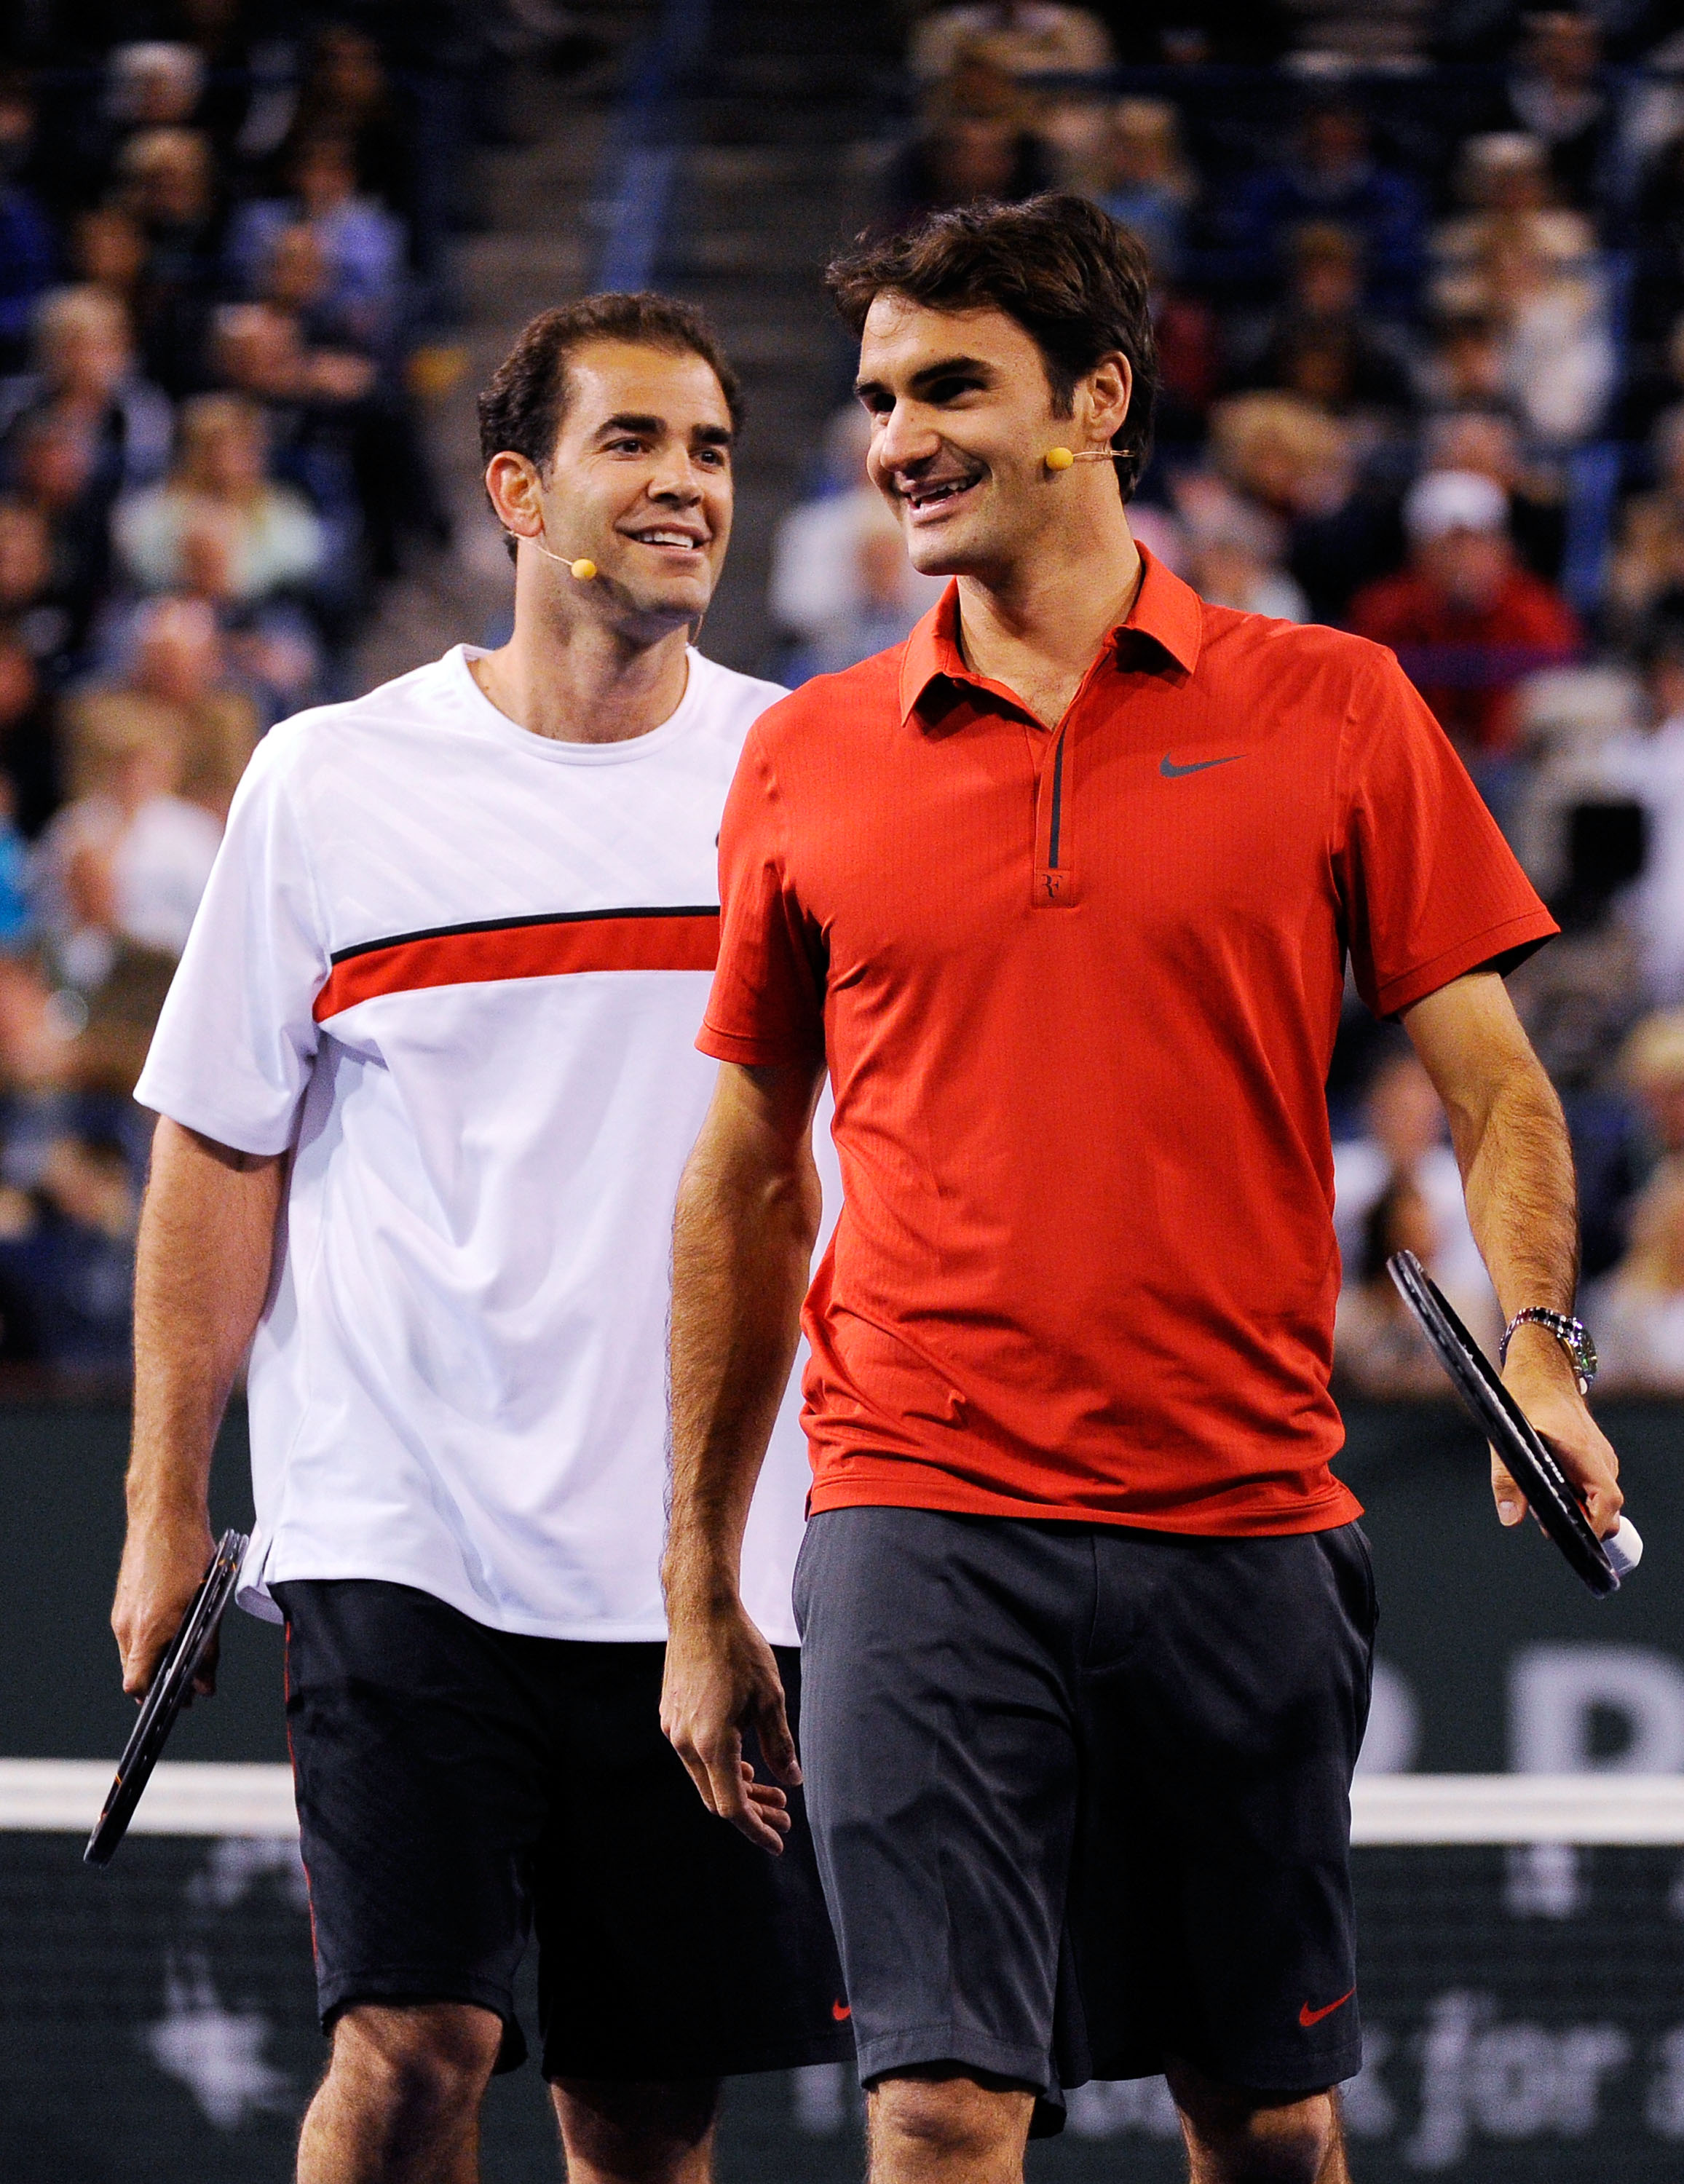 INDIAN WELLS, CA - MARCH 12:  Former tennis player Pete Sampras and Roger Federer of Switzerland,during Hit for Haiti, a charity event during the BNP Paribas Open on March 12, 2010 in Indian Wells, California.  (Photo by Kevork Djansezian/Getty Images)